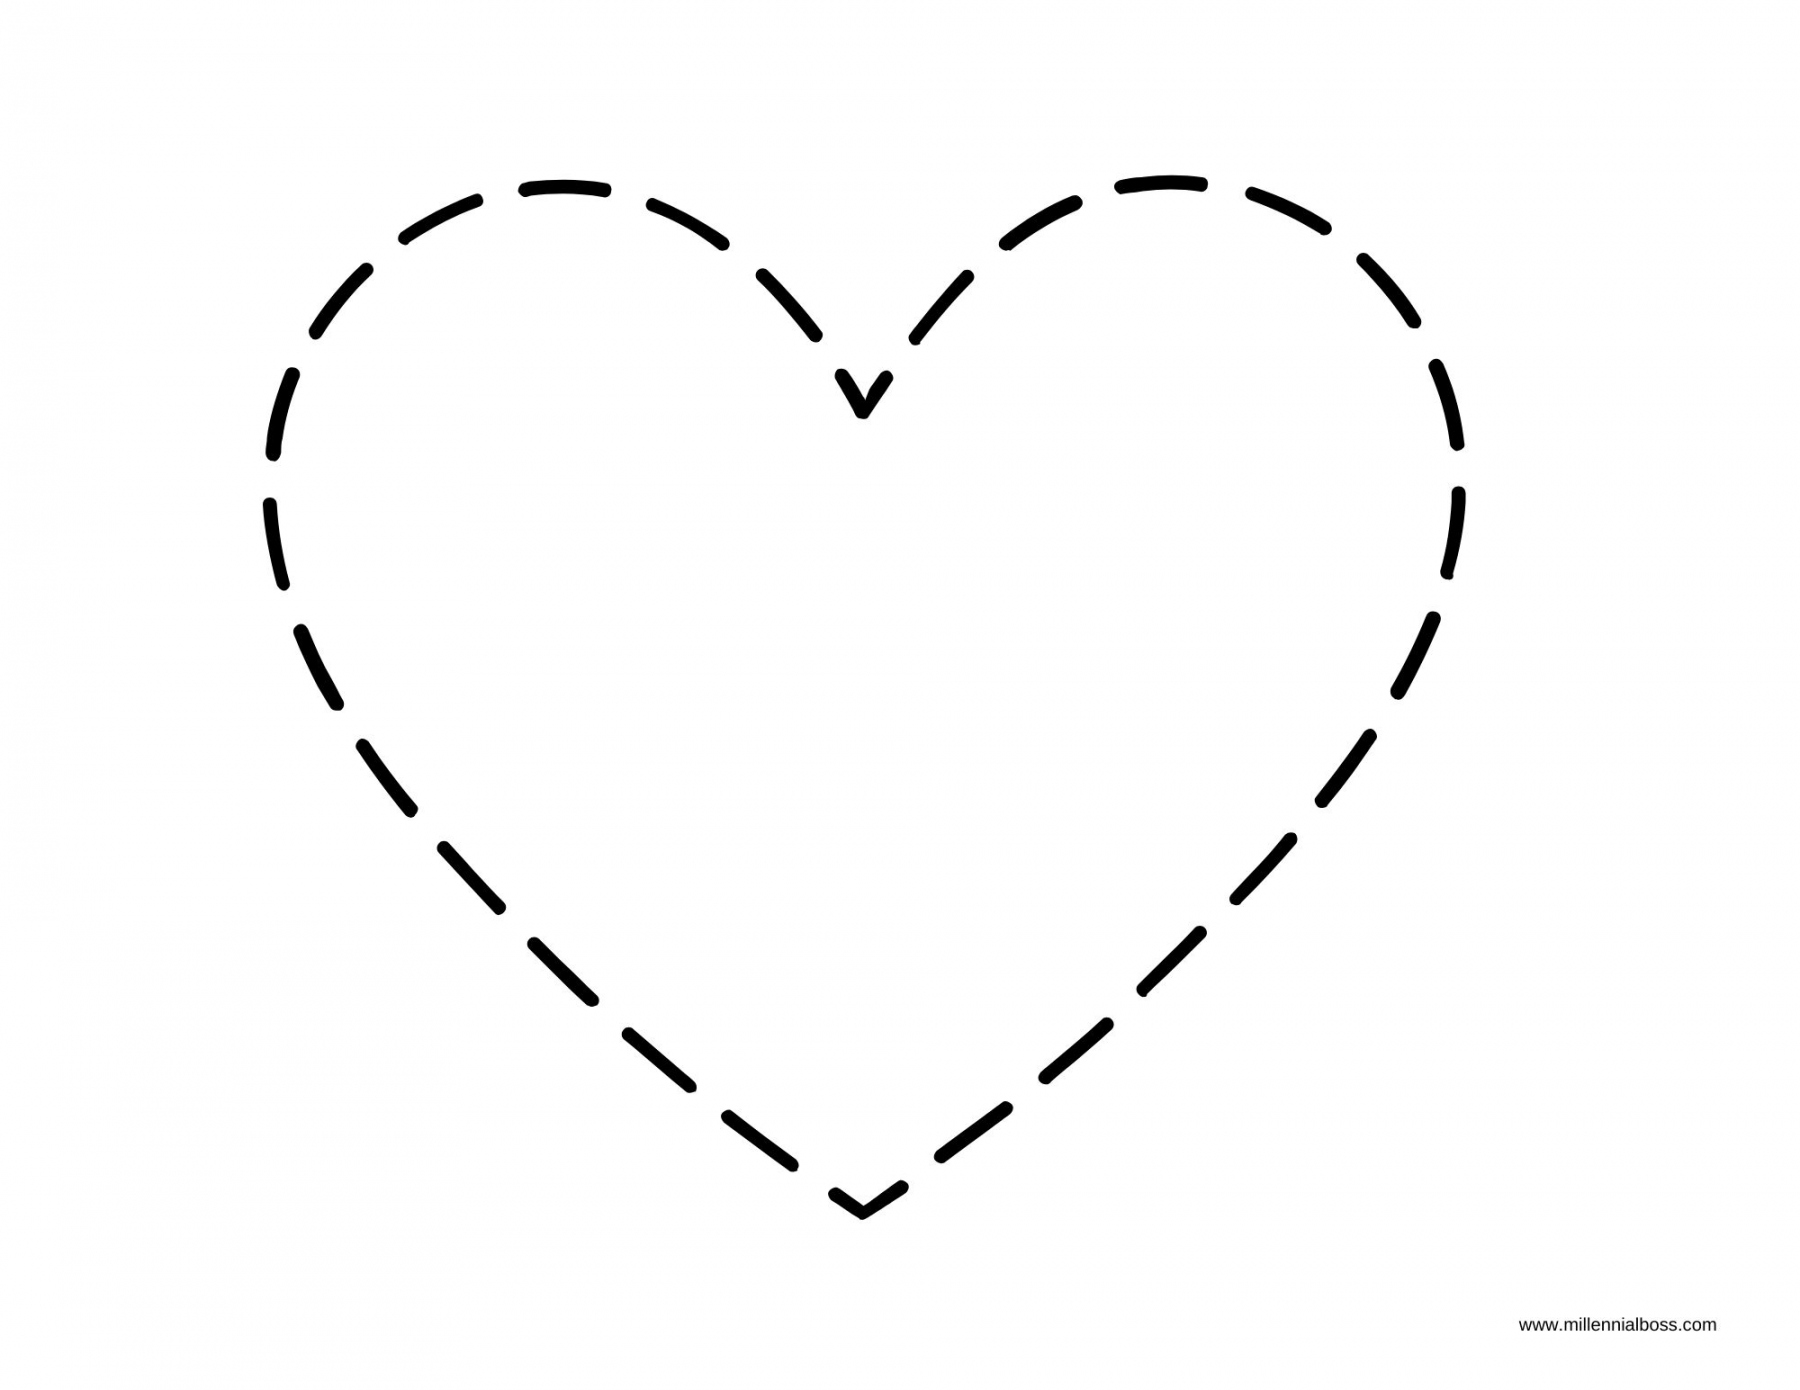 Free Heart Templates Printable - Printable - Free Heart Templates pdf in all different sizes